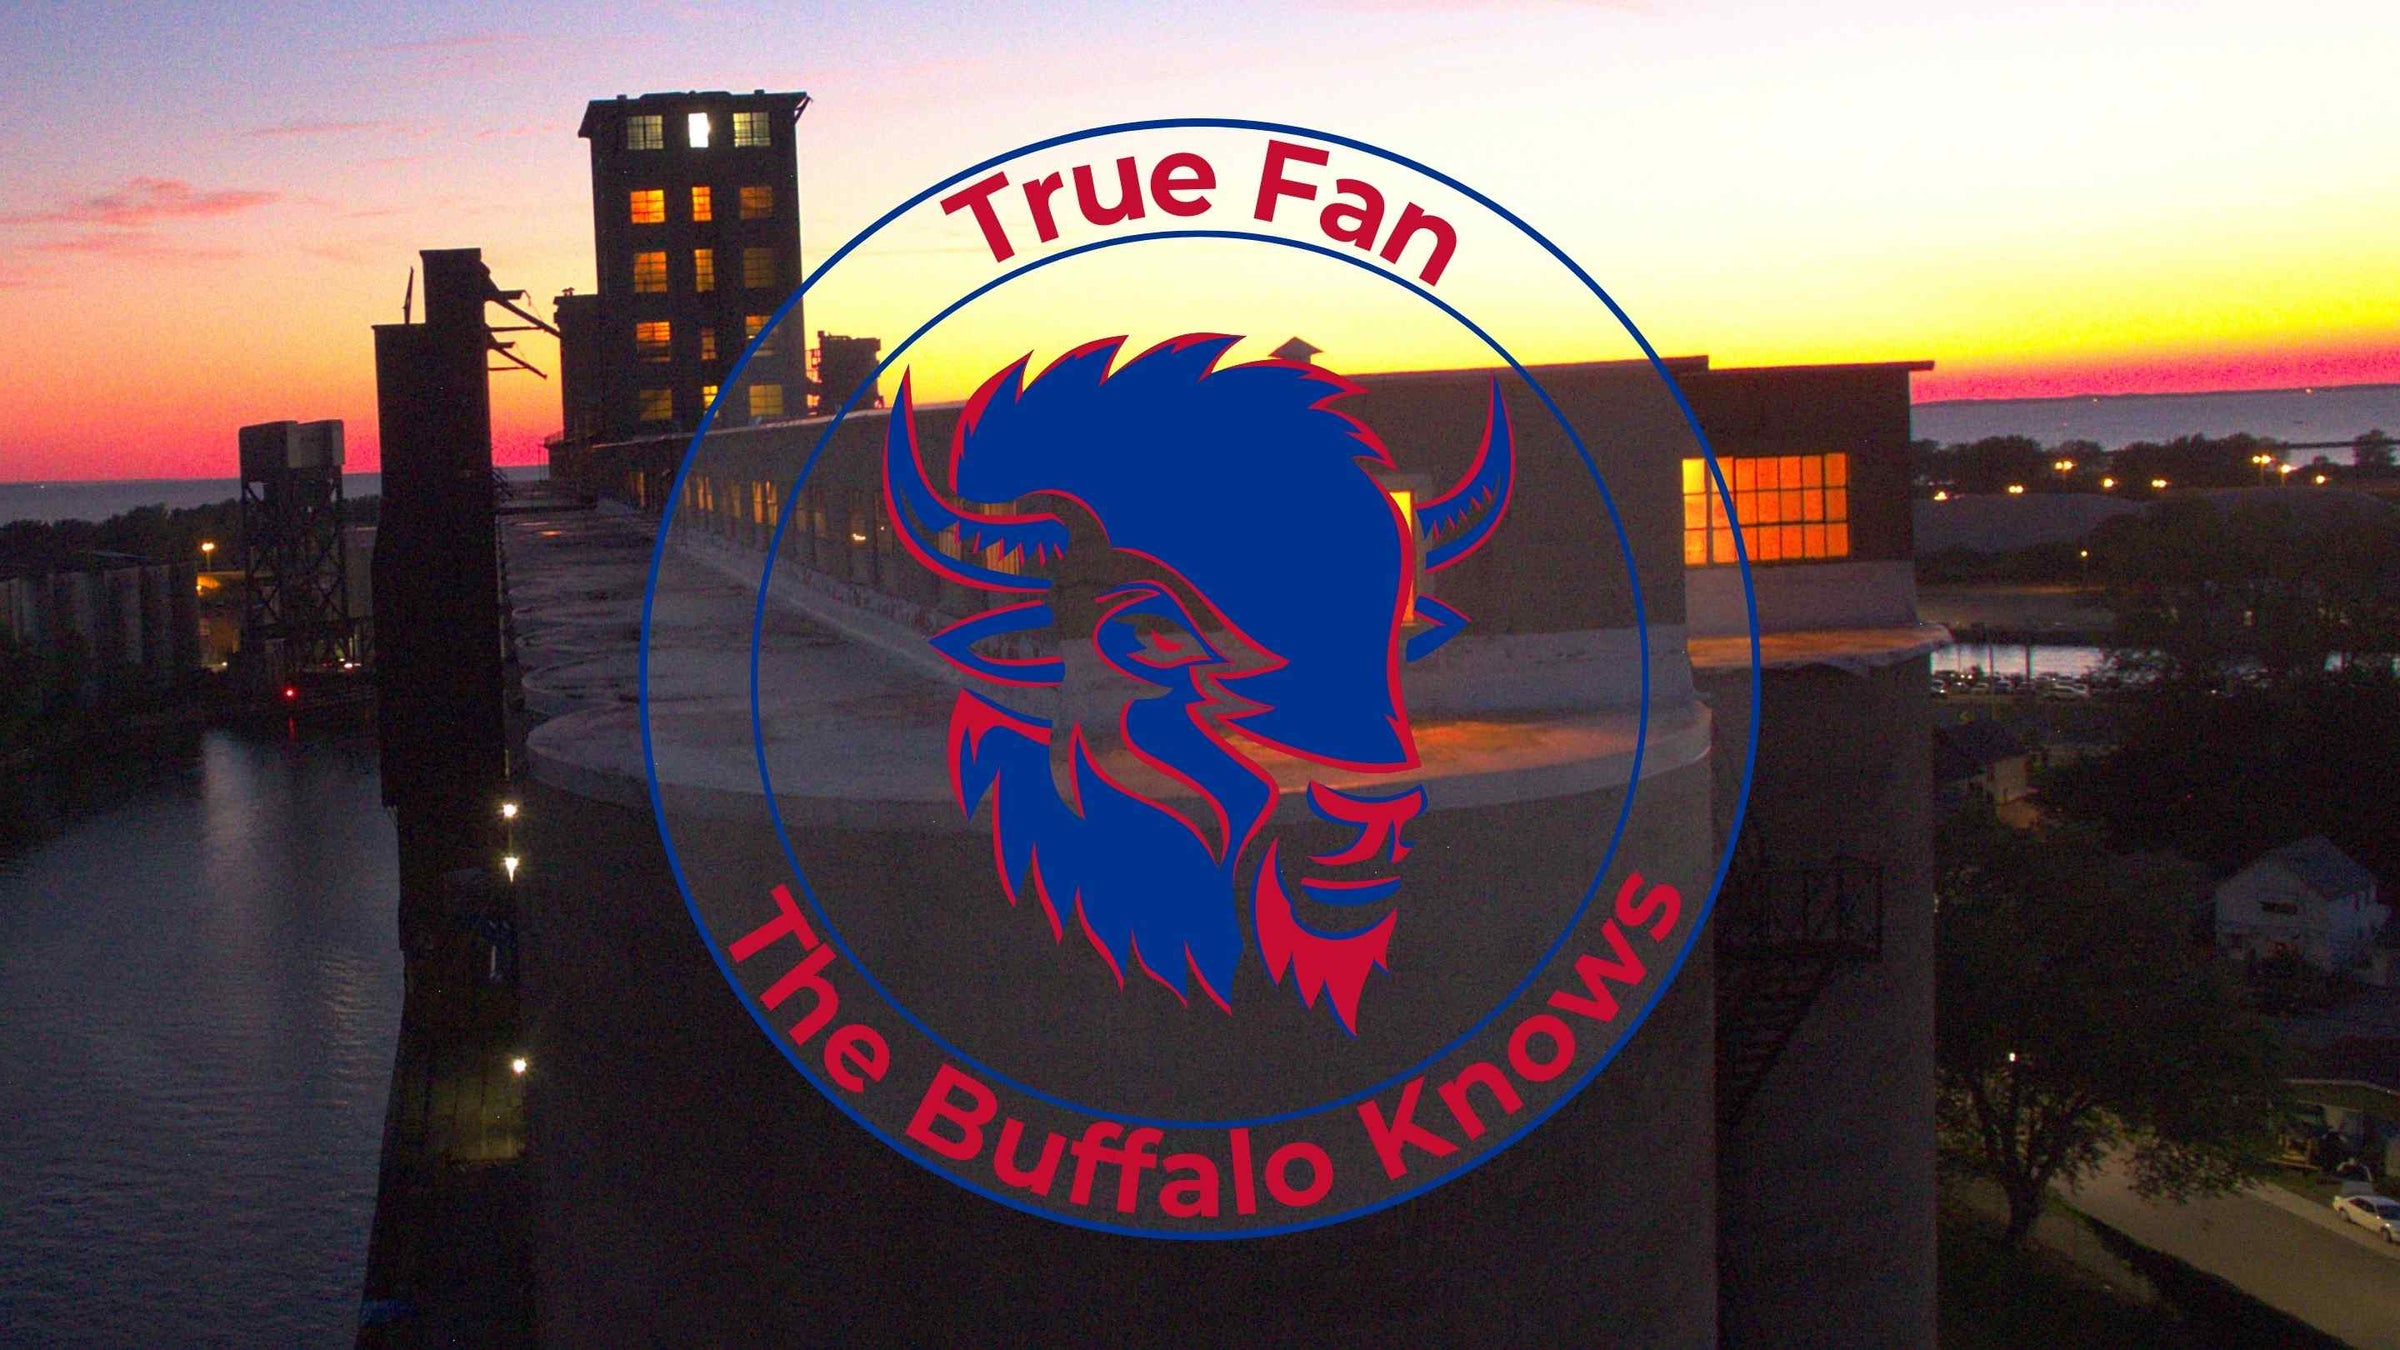 Follow The Buffalo Knows Blog - Stay updated on our unique Buffalo Bills gifts, find out where we'll be next, and keep up with our latest product releases.